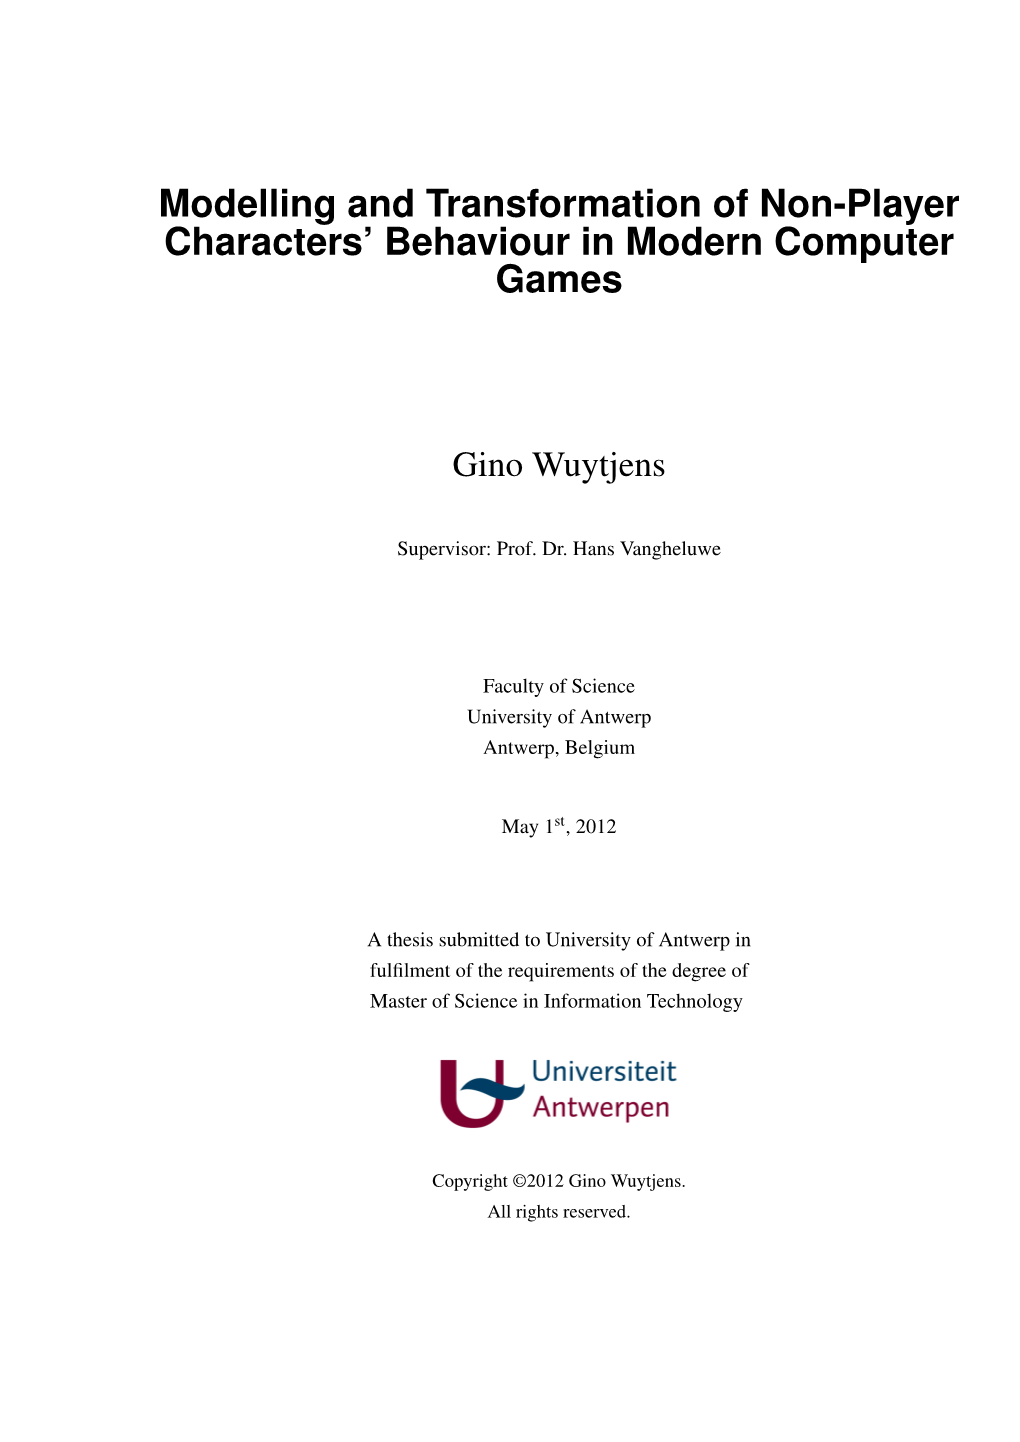 Modelling and Transformation of Non-Player Characters' Behaviour